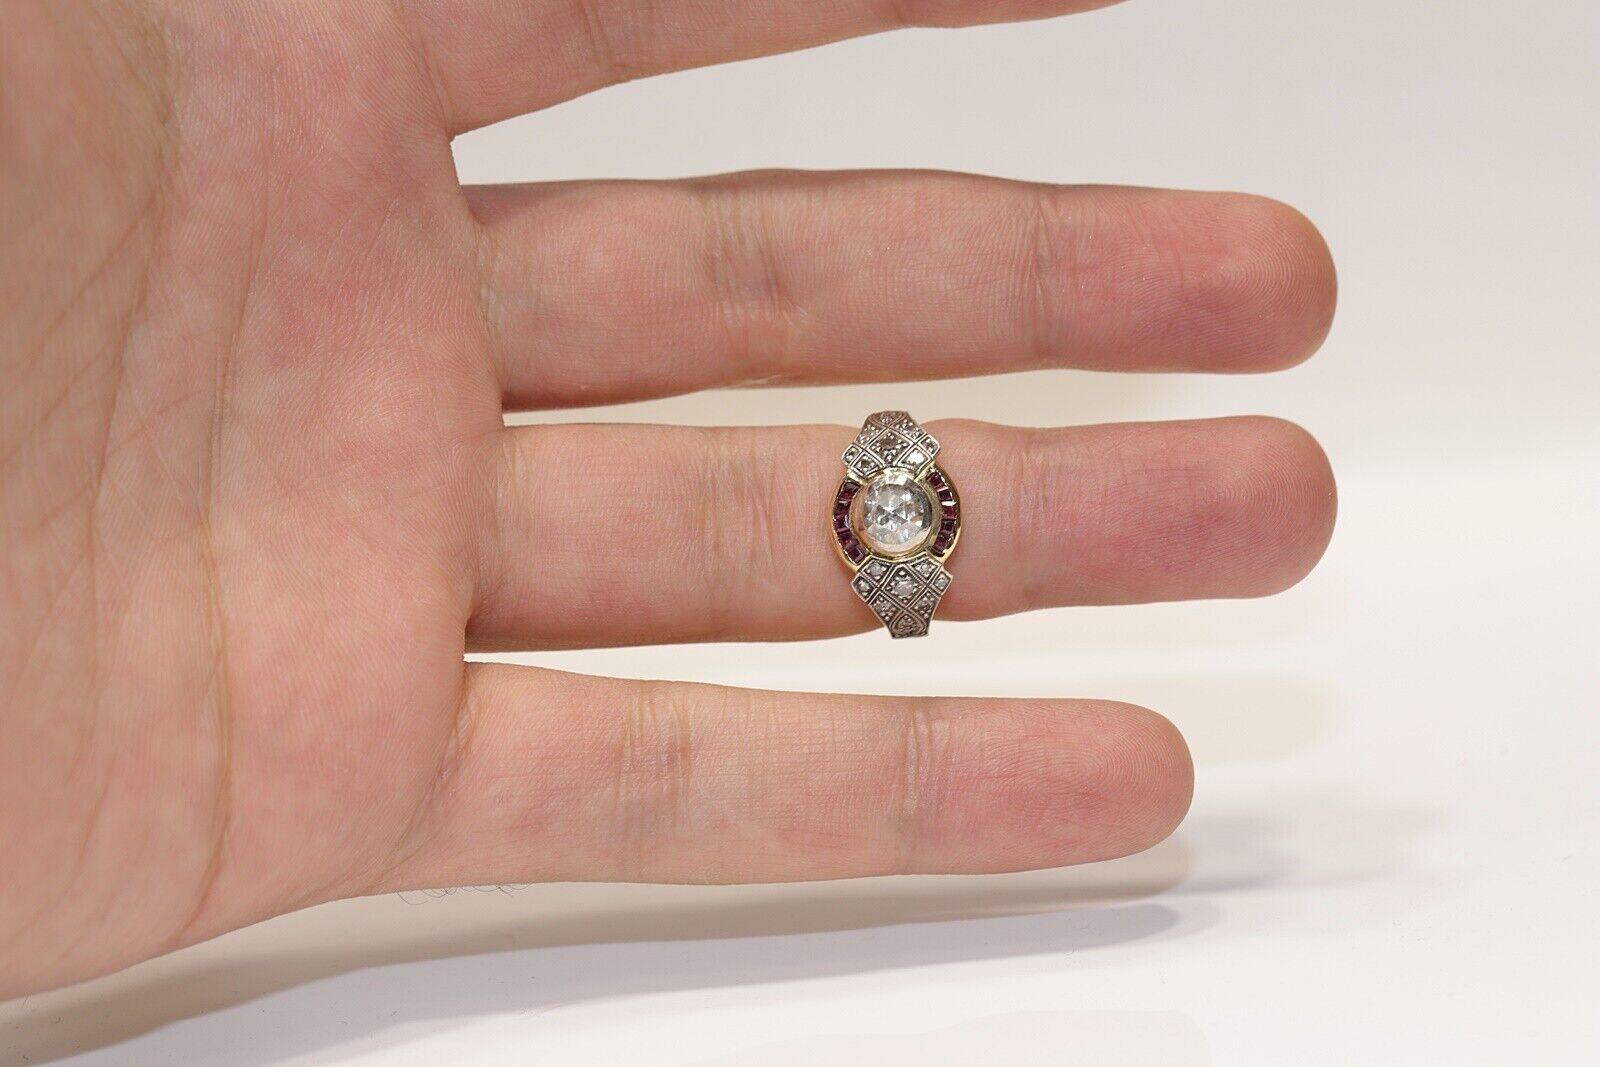 In very good condition.
Total weight is 8.9 grams.
The center rose cut diamond is about 0.80 carat.
The side brilliant cut diamond is about 0.25 ct.
The diamond is has s2-Pique 1 clarity and I color.
Original vintage item about 50 years old.
Ring